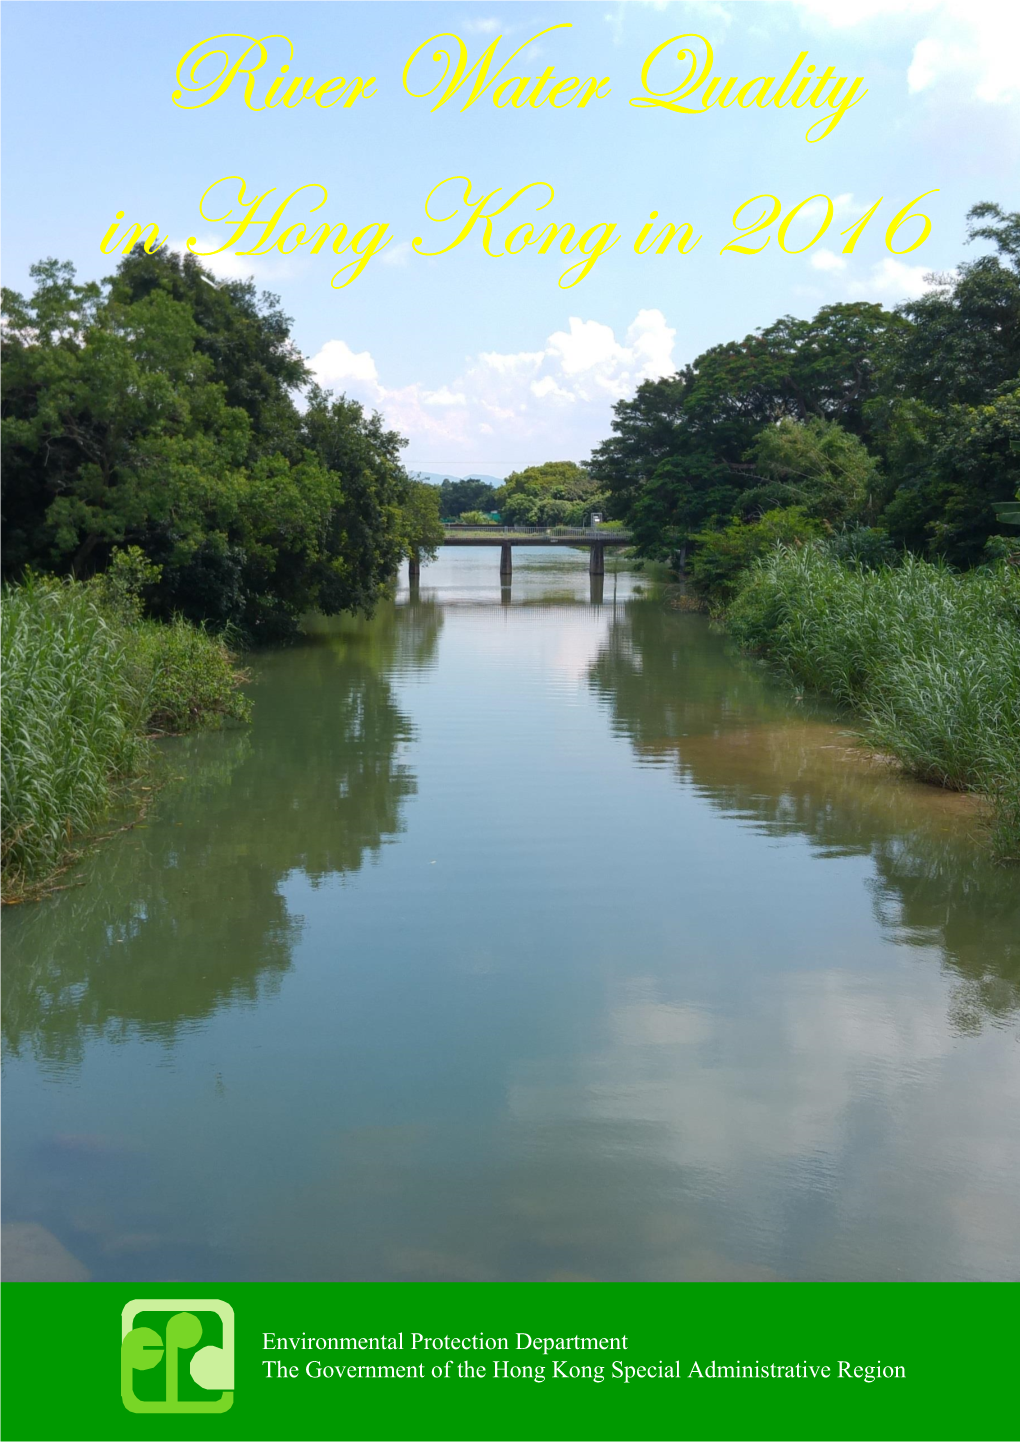 River Water Quality in Hong Kong in 2016